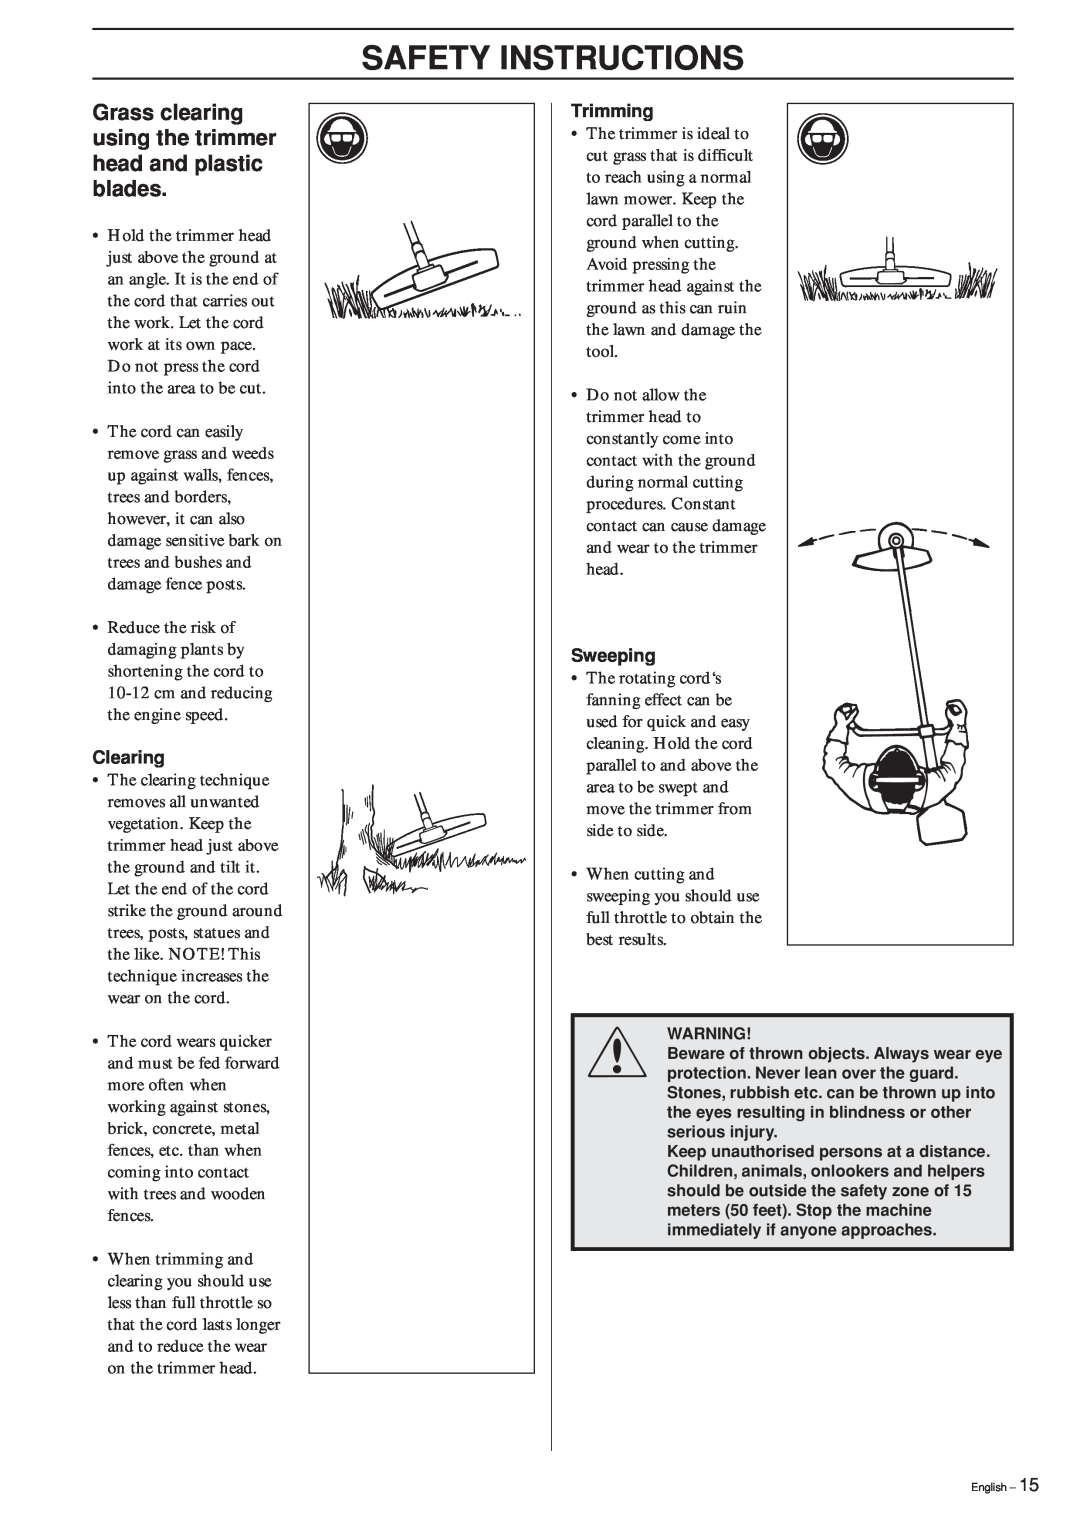 Jonsered GR 2126D manual Safety Instructions, Grass clearing using the trimmer head and plastic blades, Clearing, Trimming 